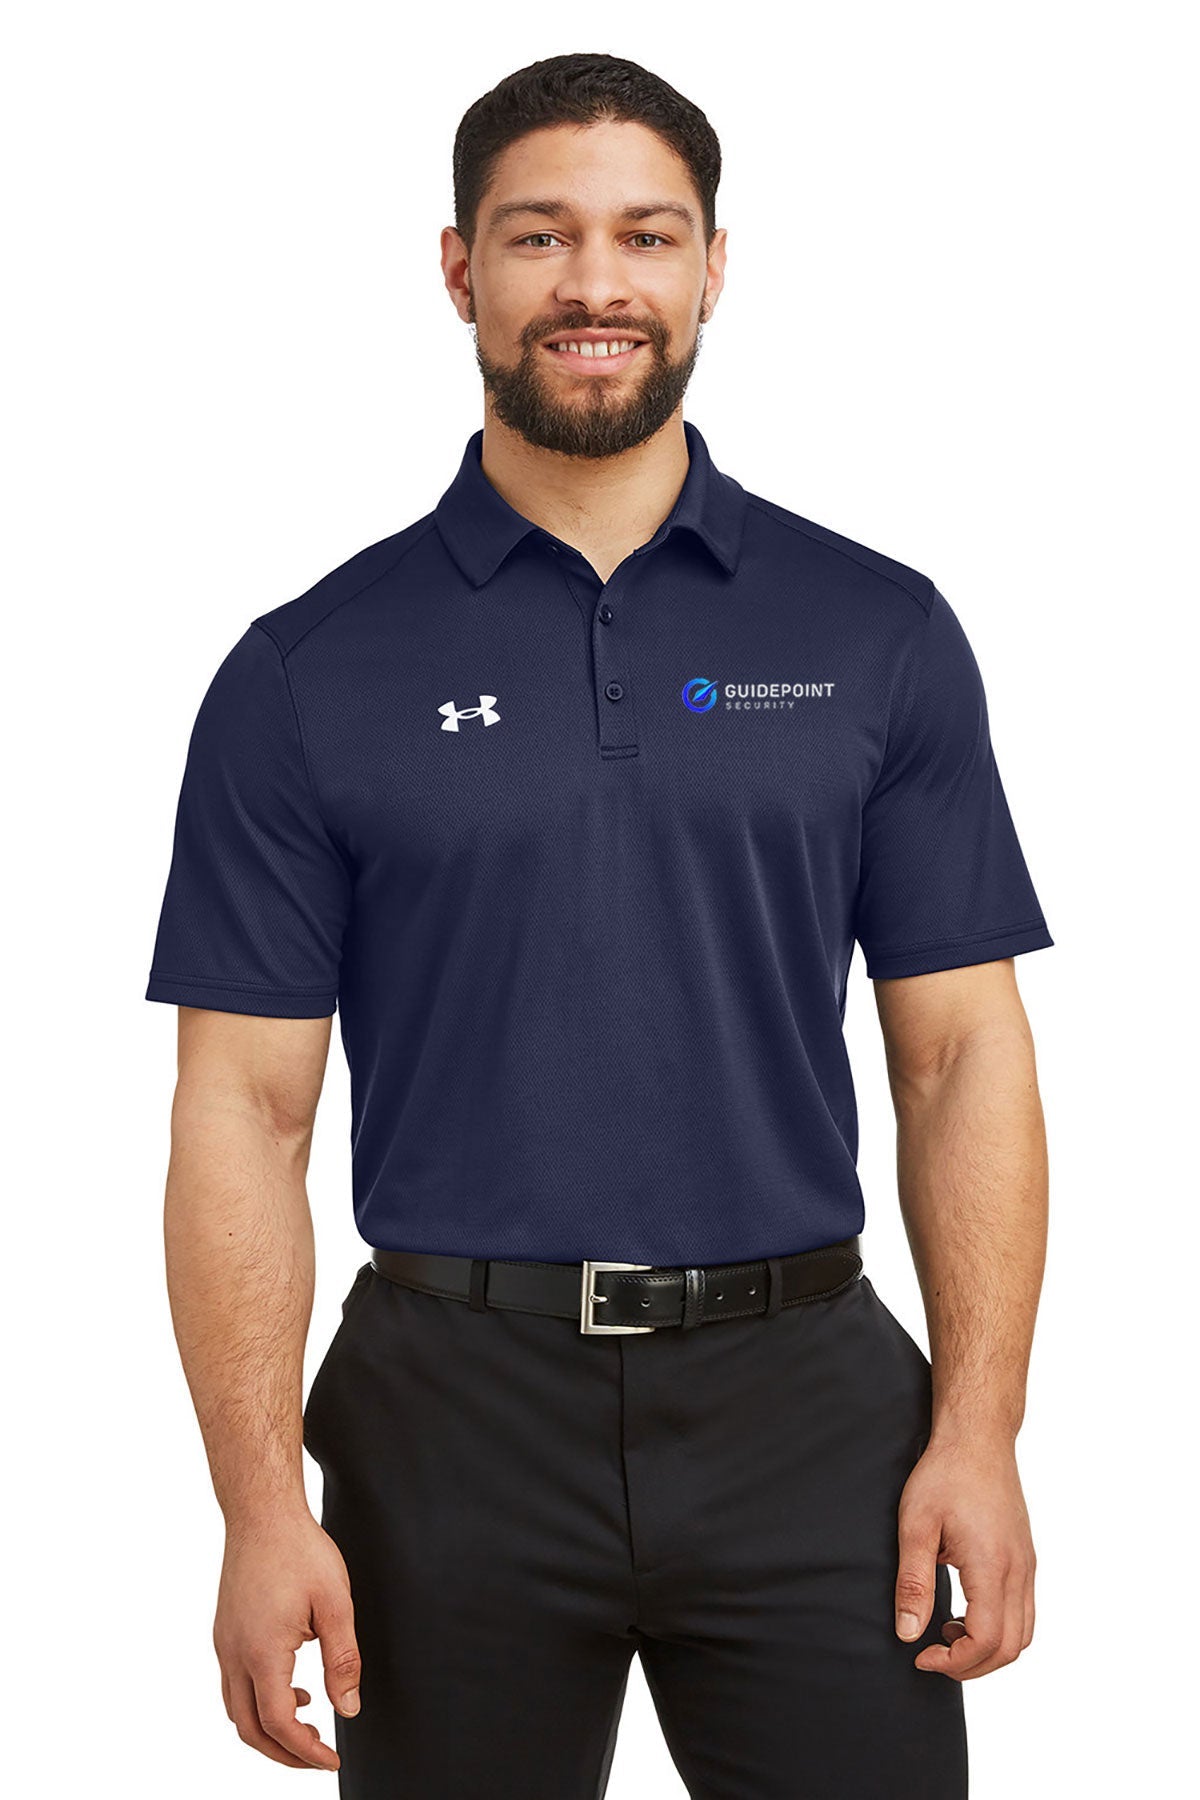 Under Armour Men's Tech Polo, Mid Navy [GuidePoint Security]